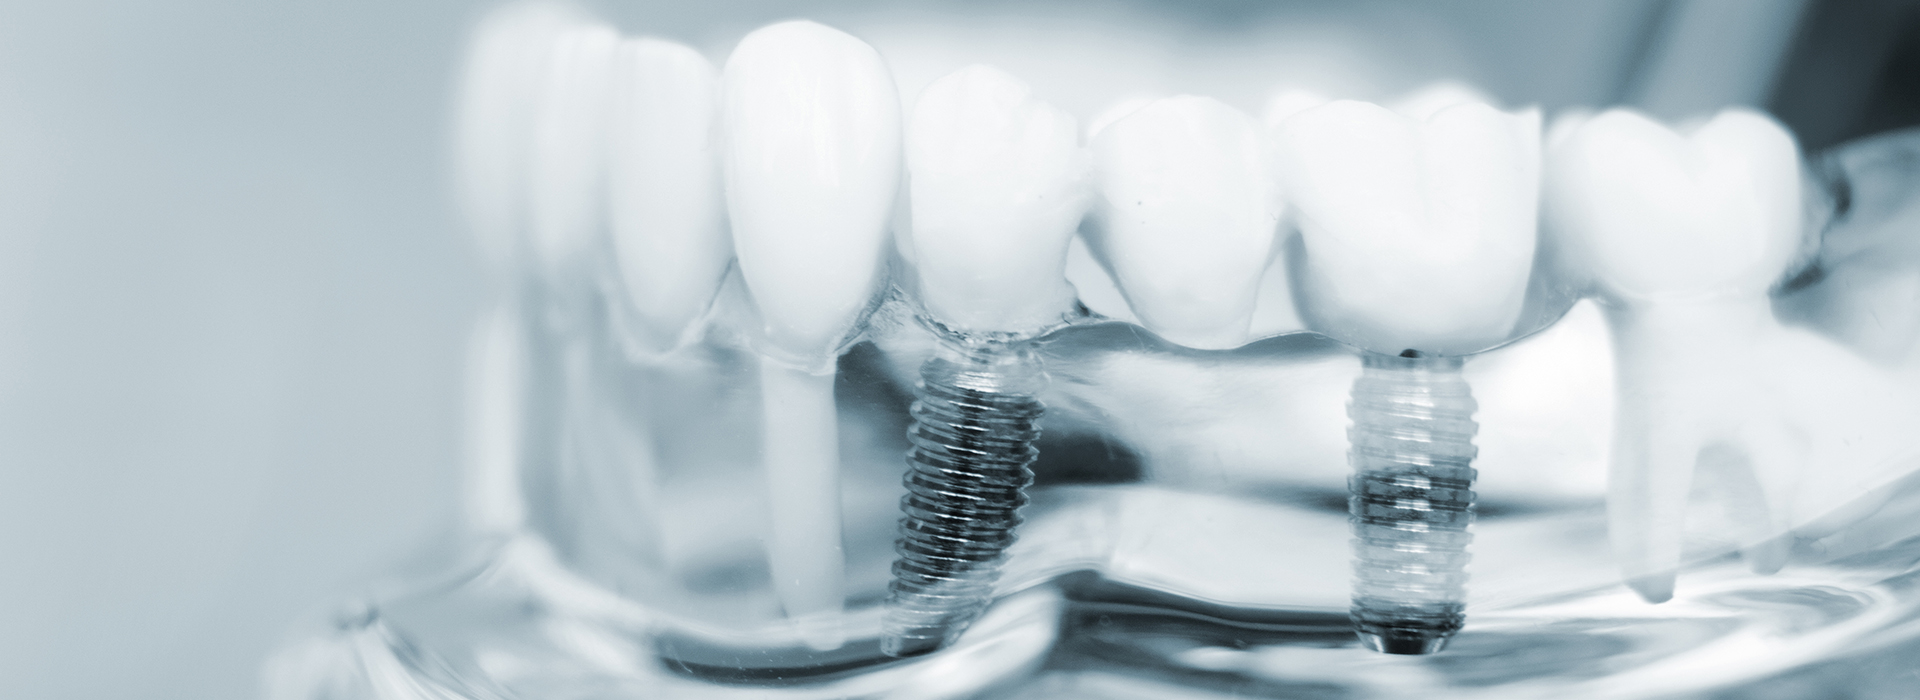 The image shows a close-up of multiple dental implants with visible screws, set against a blurred background that appears to be a mouth or teeth.